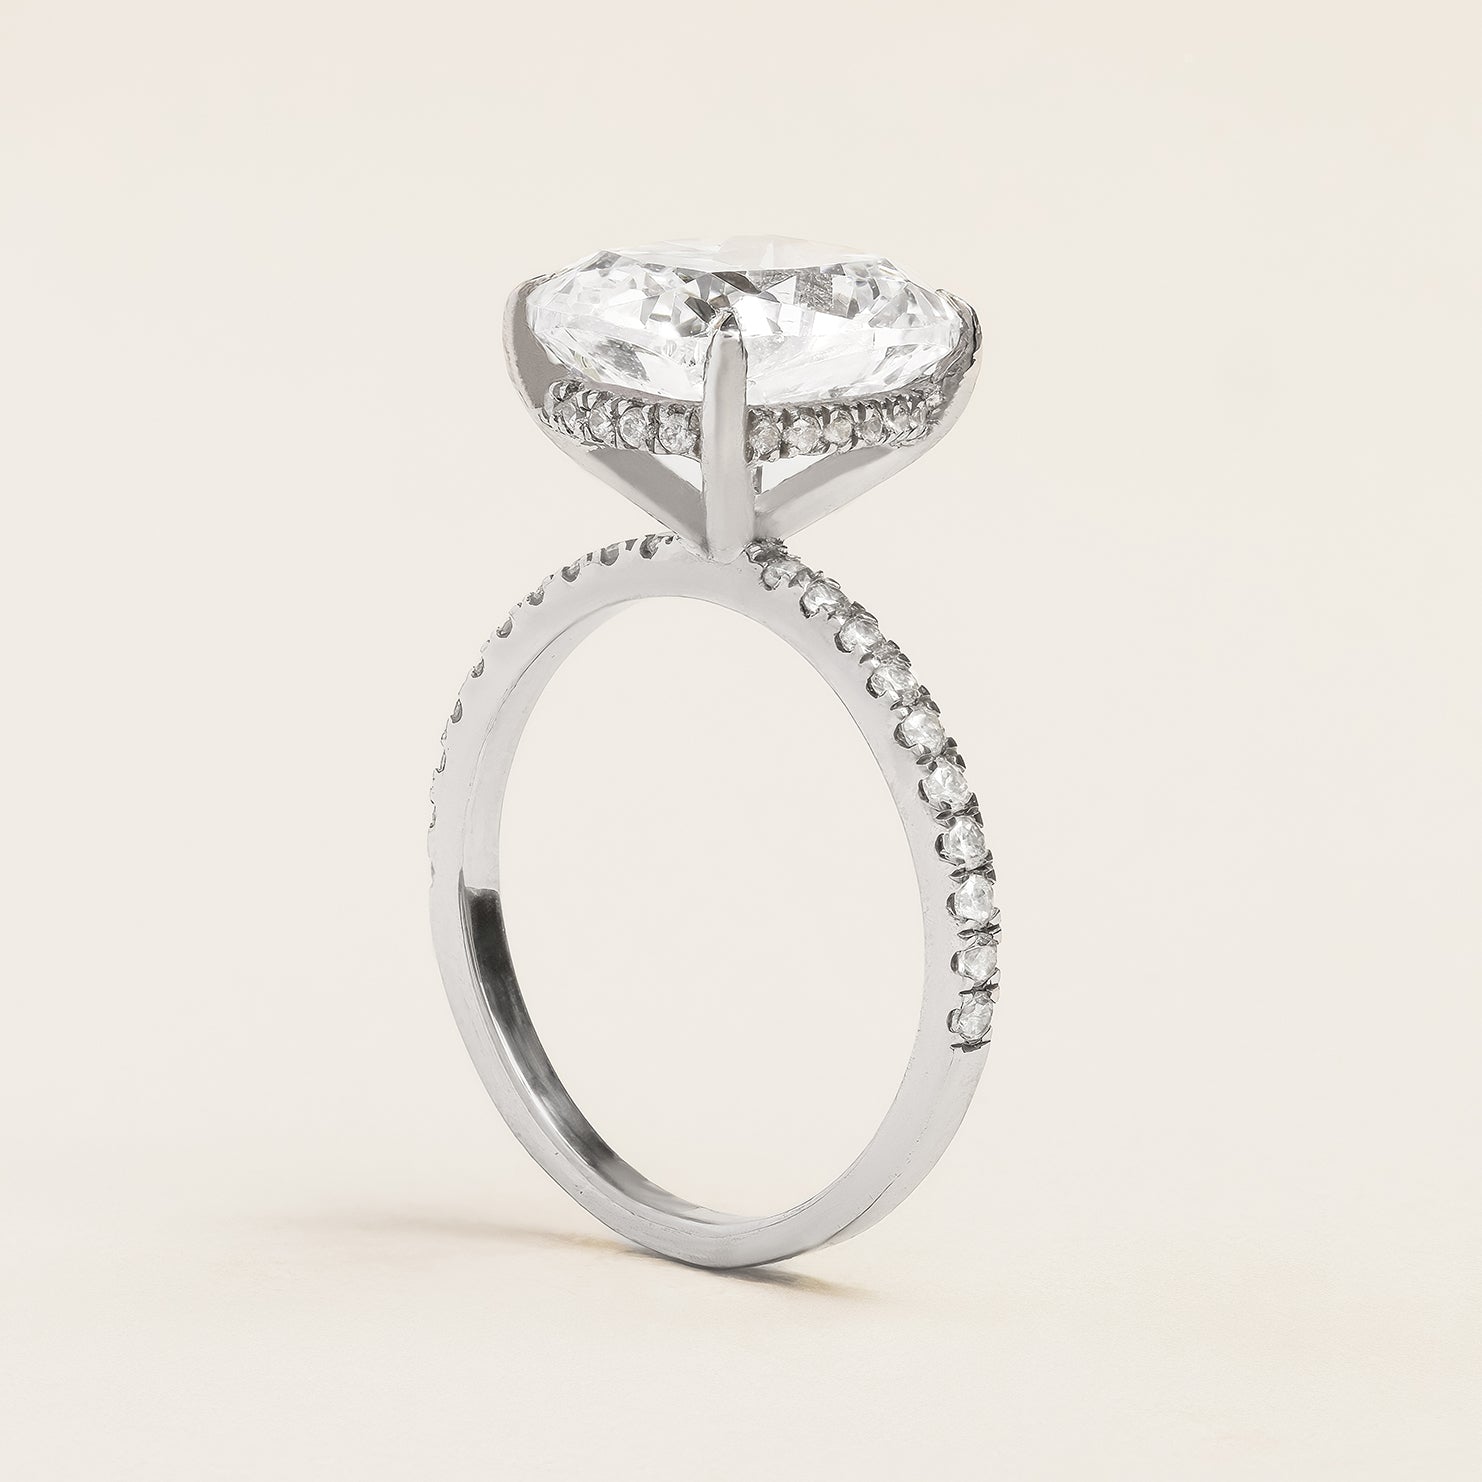 Elongated Cushion Cut Engagement Ring With Hidden Halo